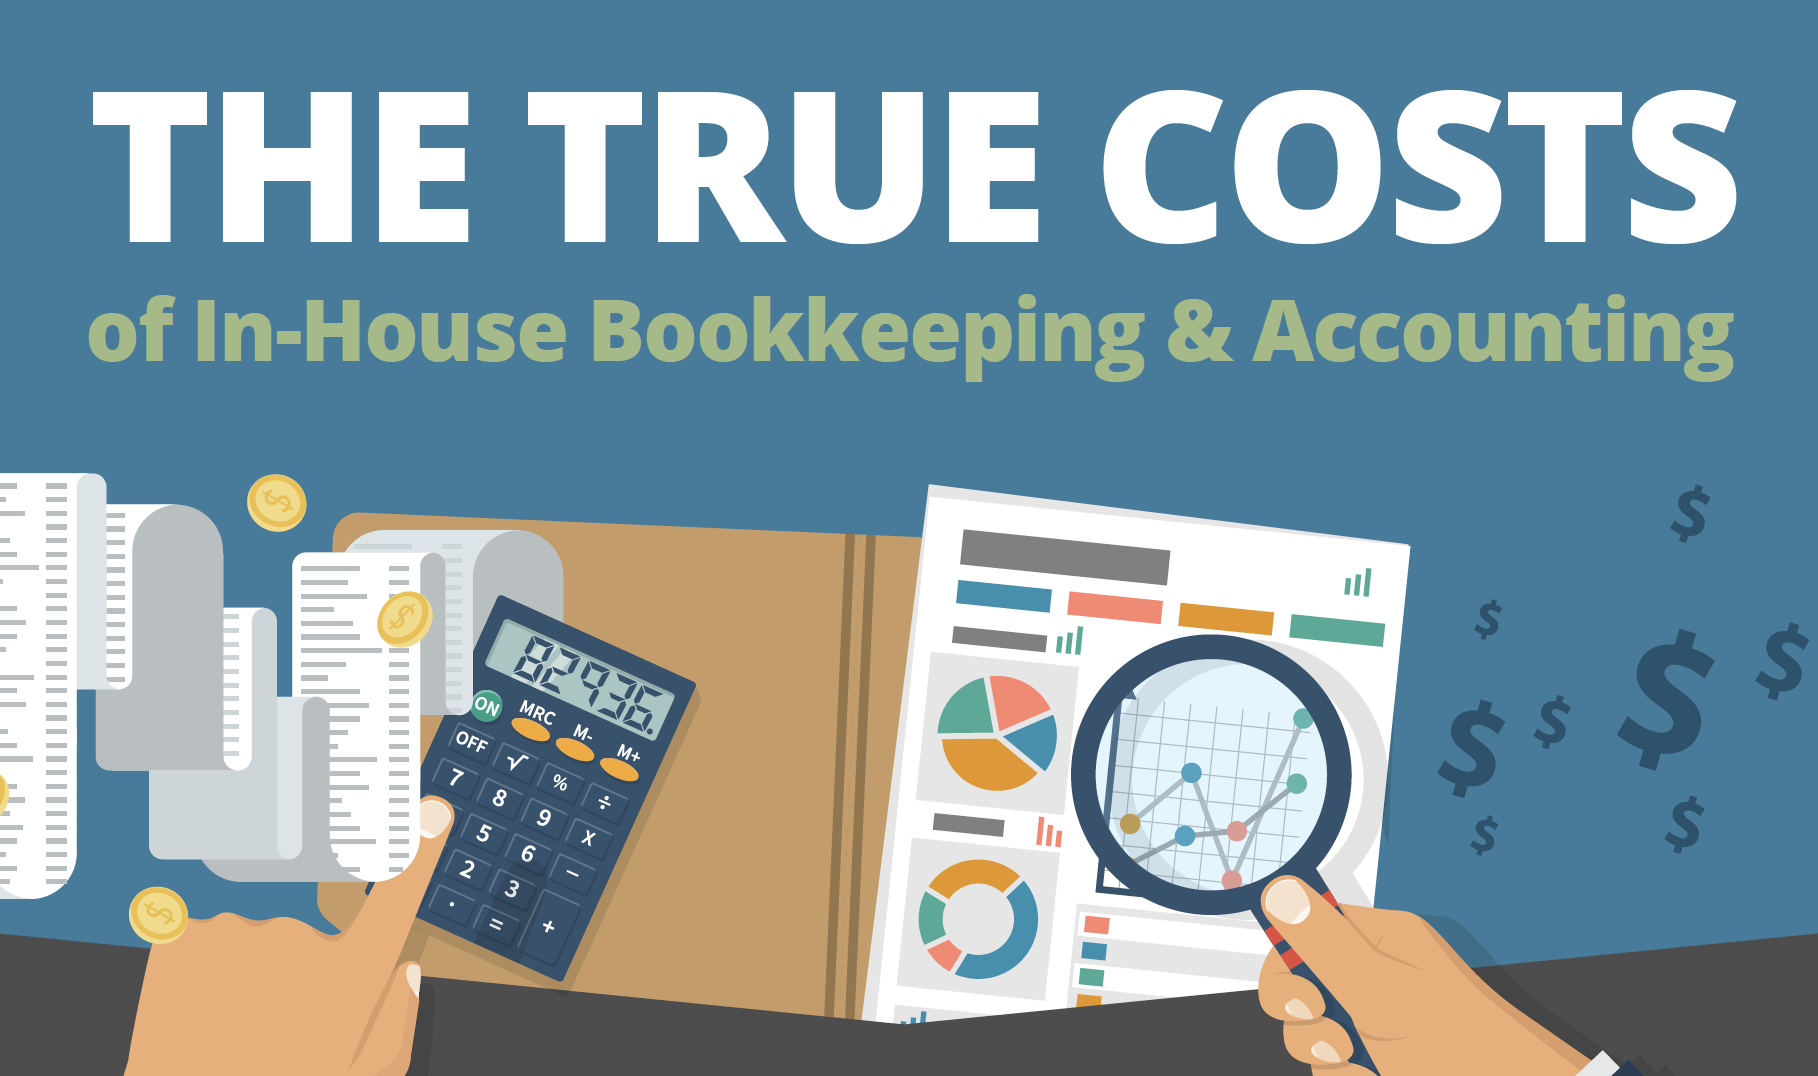 What is the true cost of in-house bookkeeper?